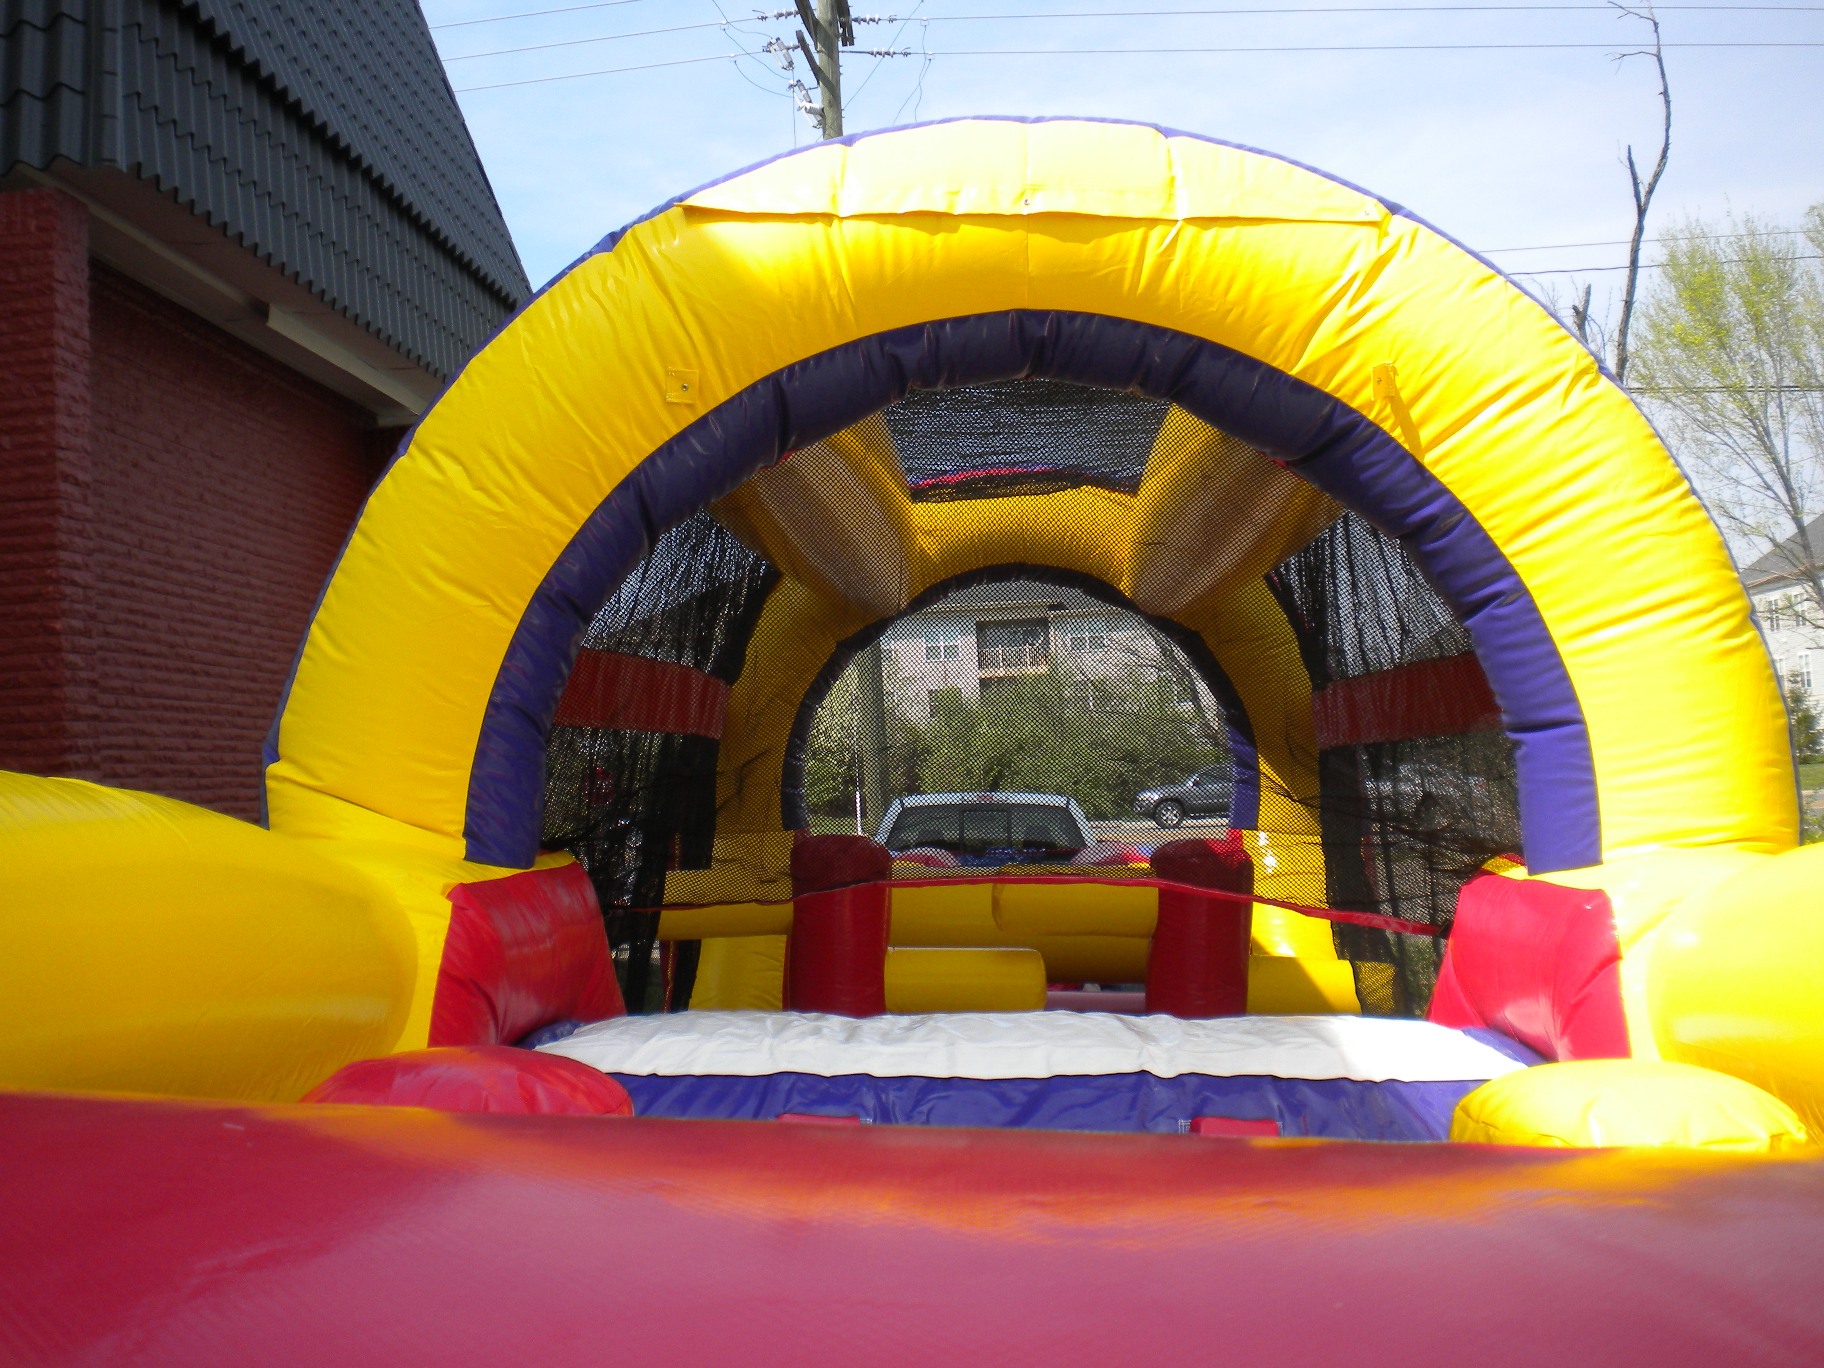 Front internal view of 40' Backyard Obstacle Challenge Inflatable Moonbounce